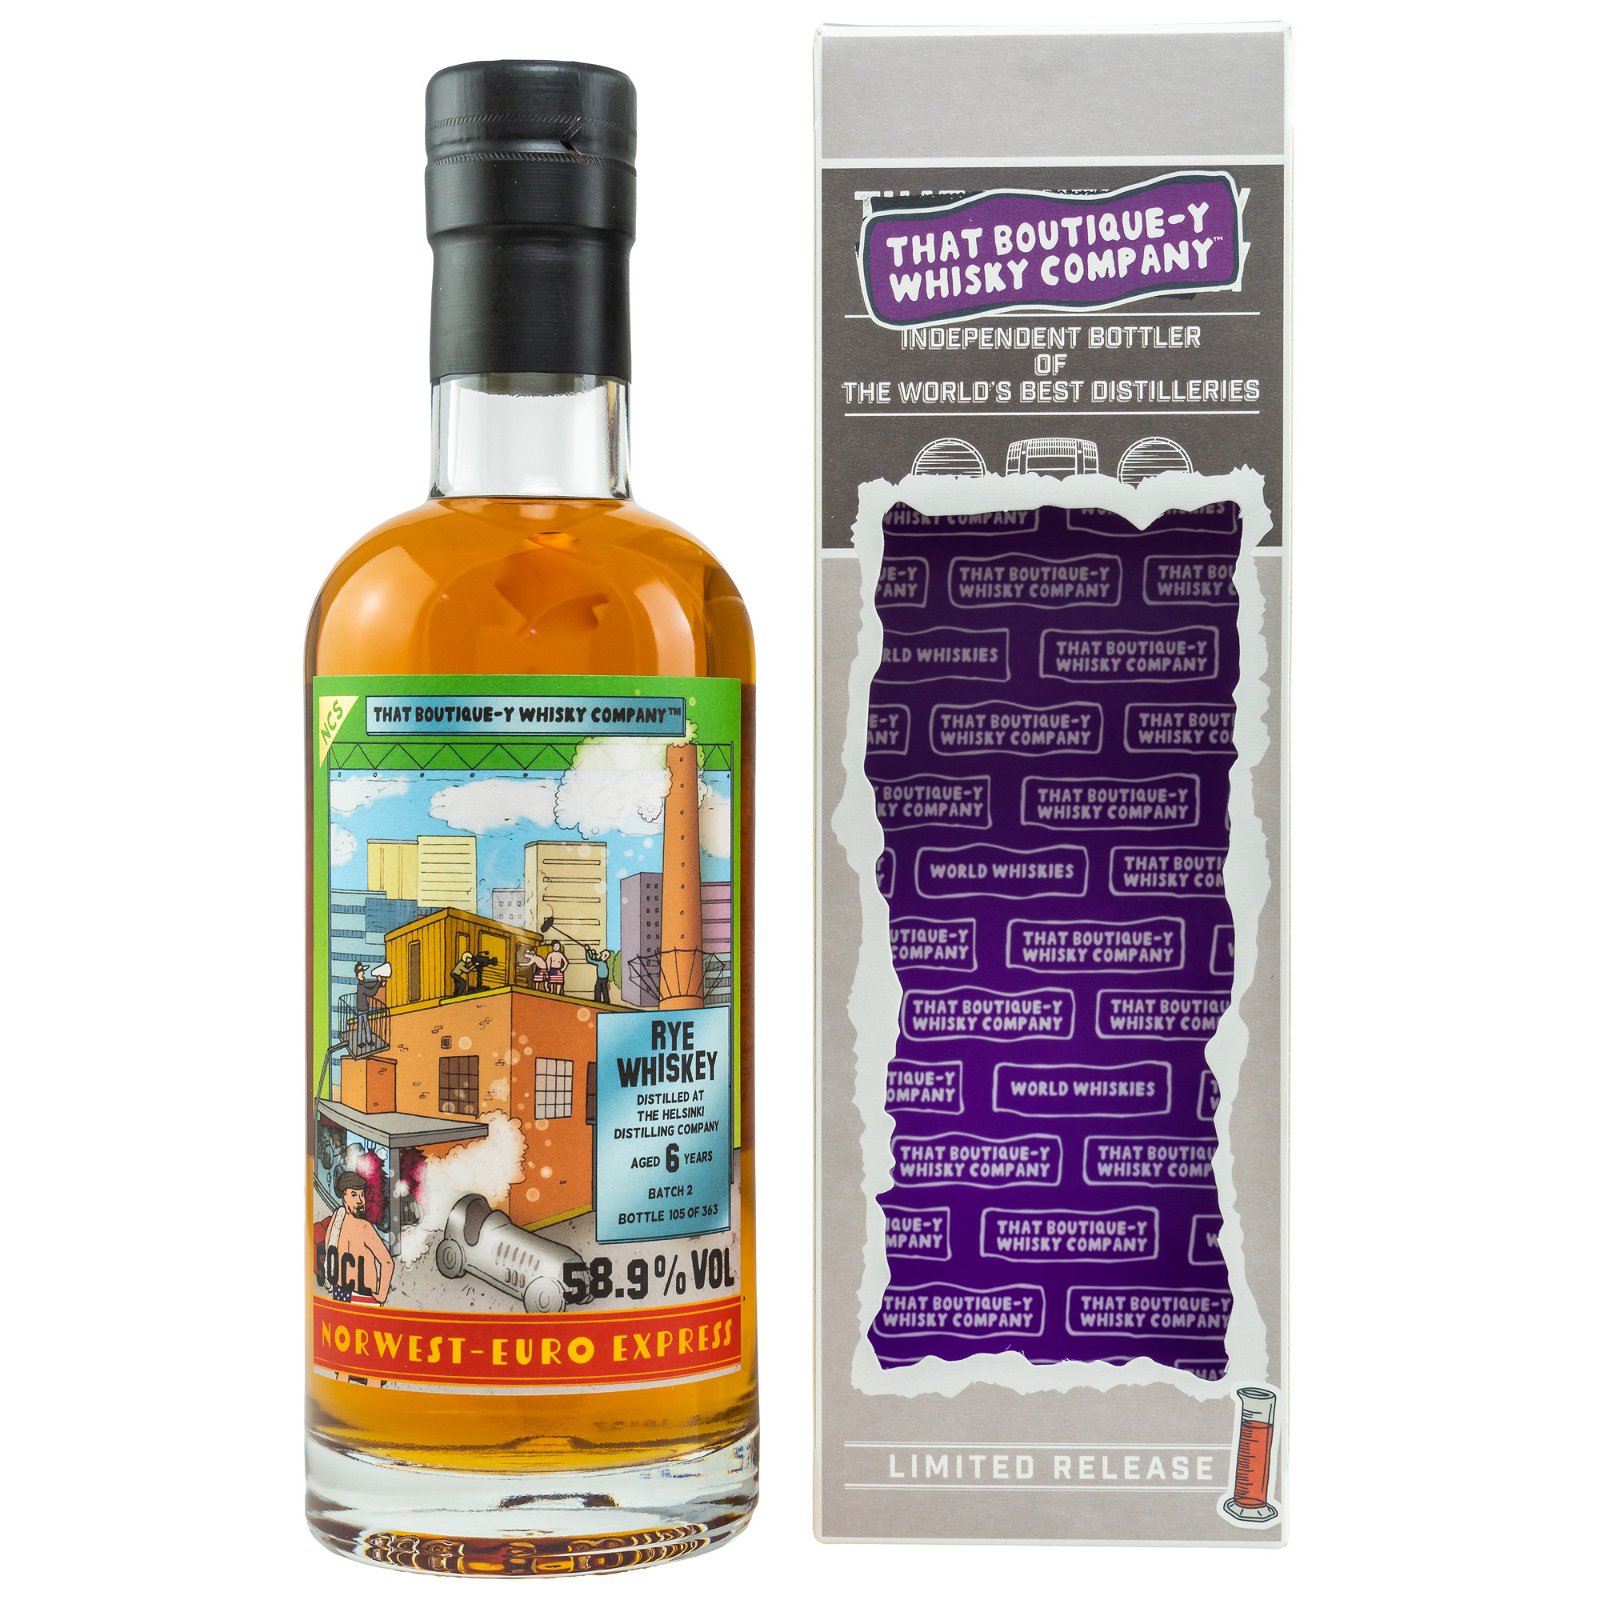 The Helsinki Distilling Company 6 Jahre Batch 2 (That Boutique-y Whisky Company)